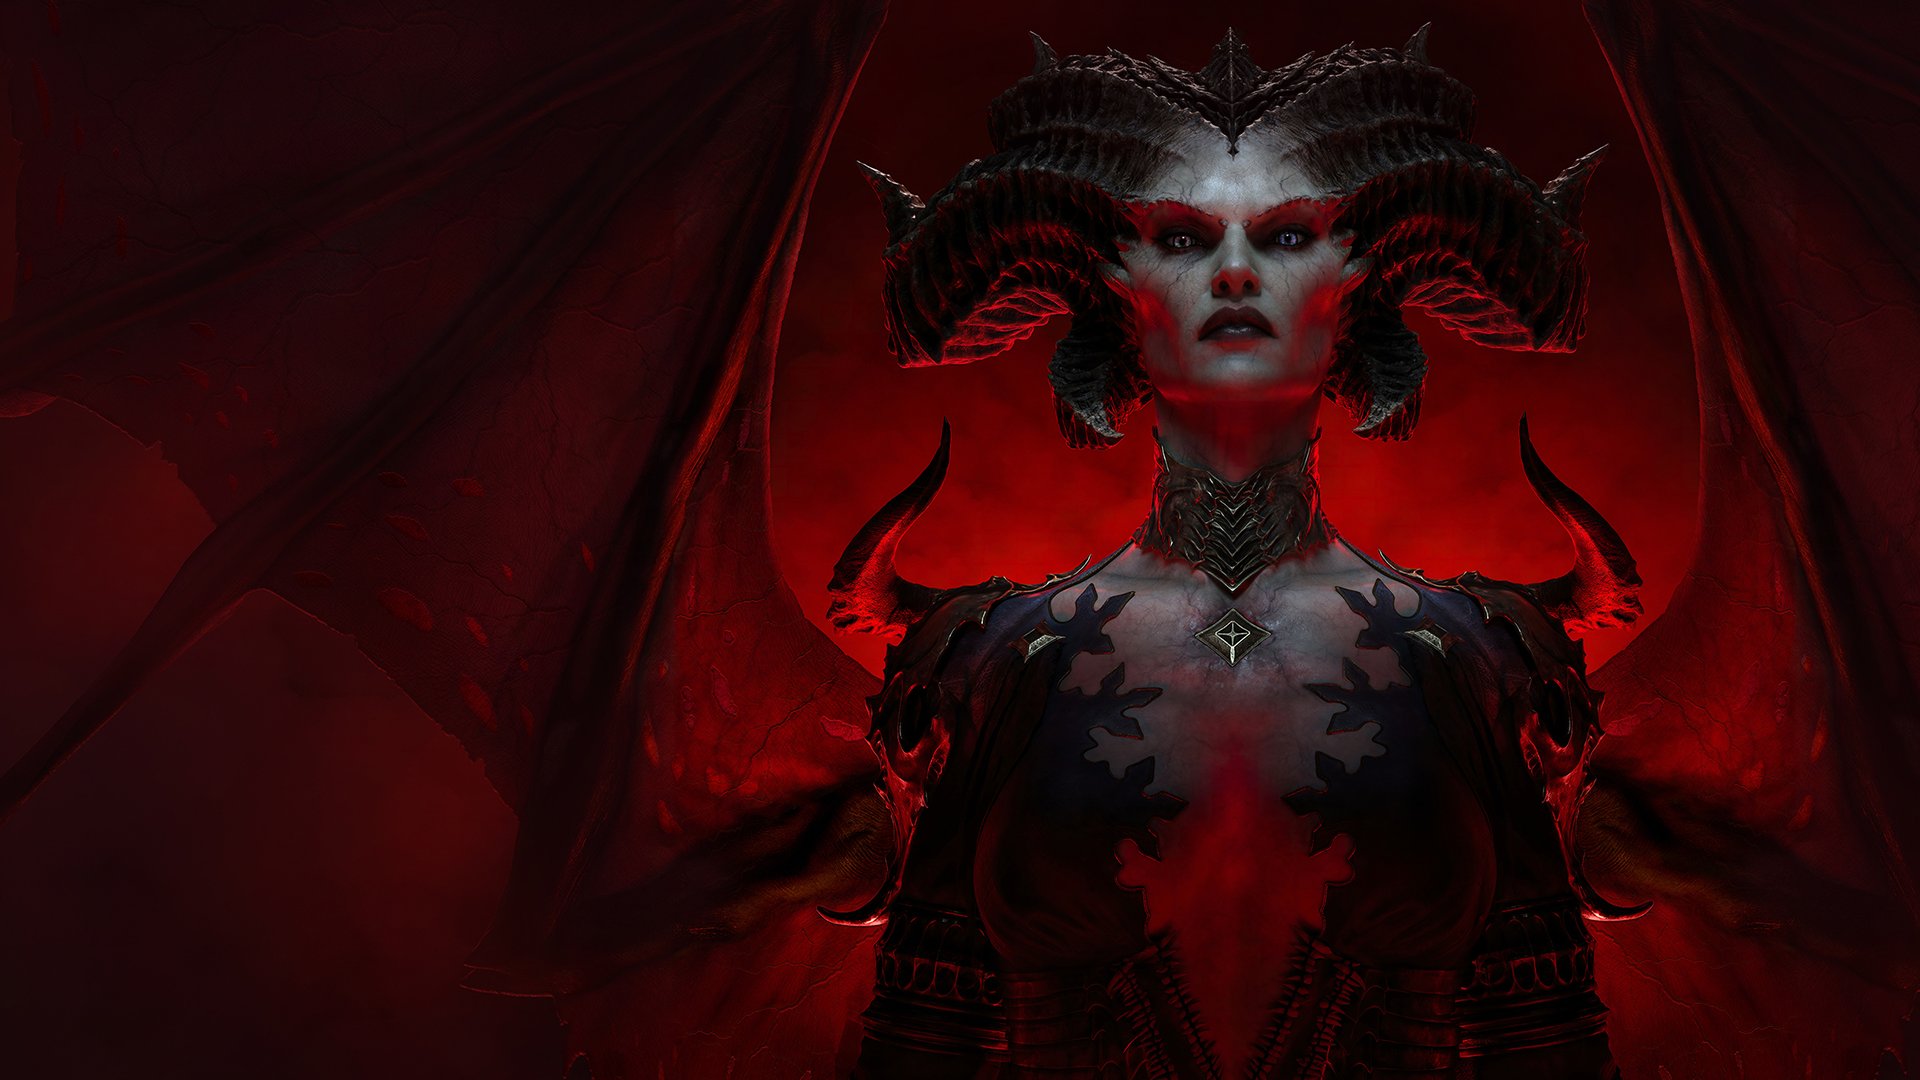 Diablo IV is free to play on Steam until November 28; get a 40